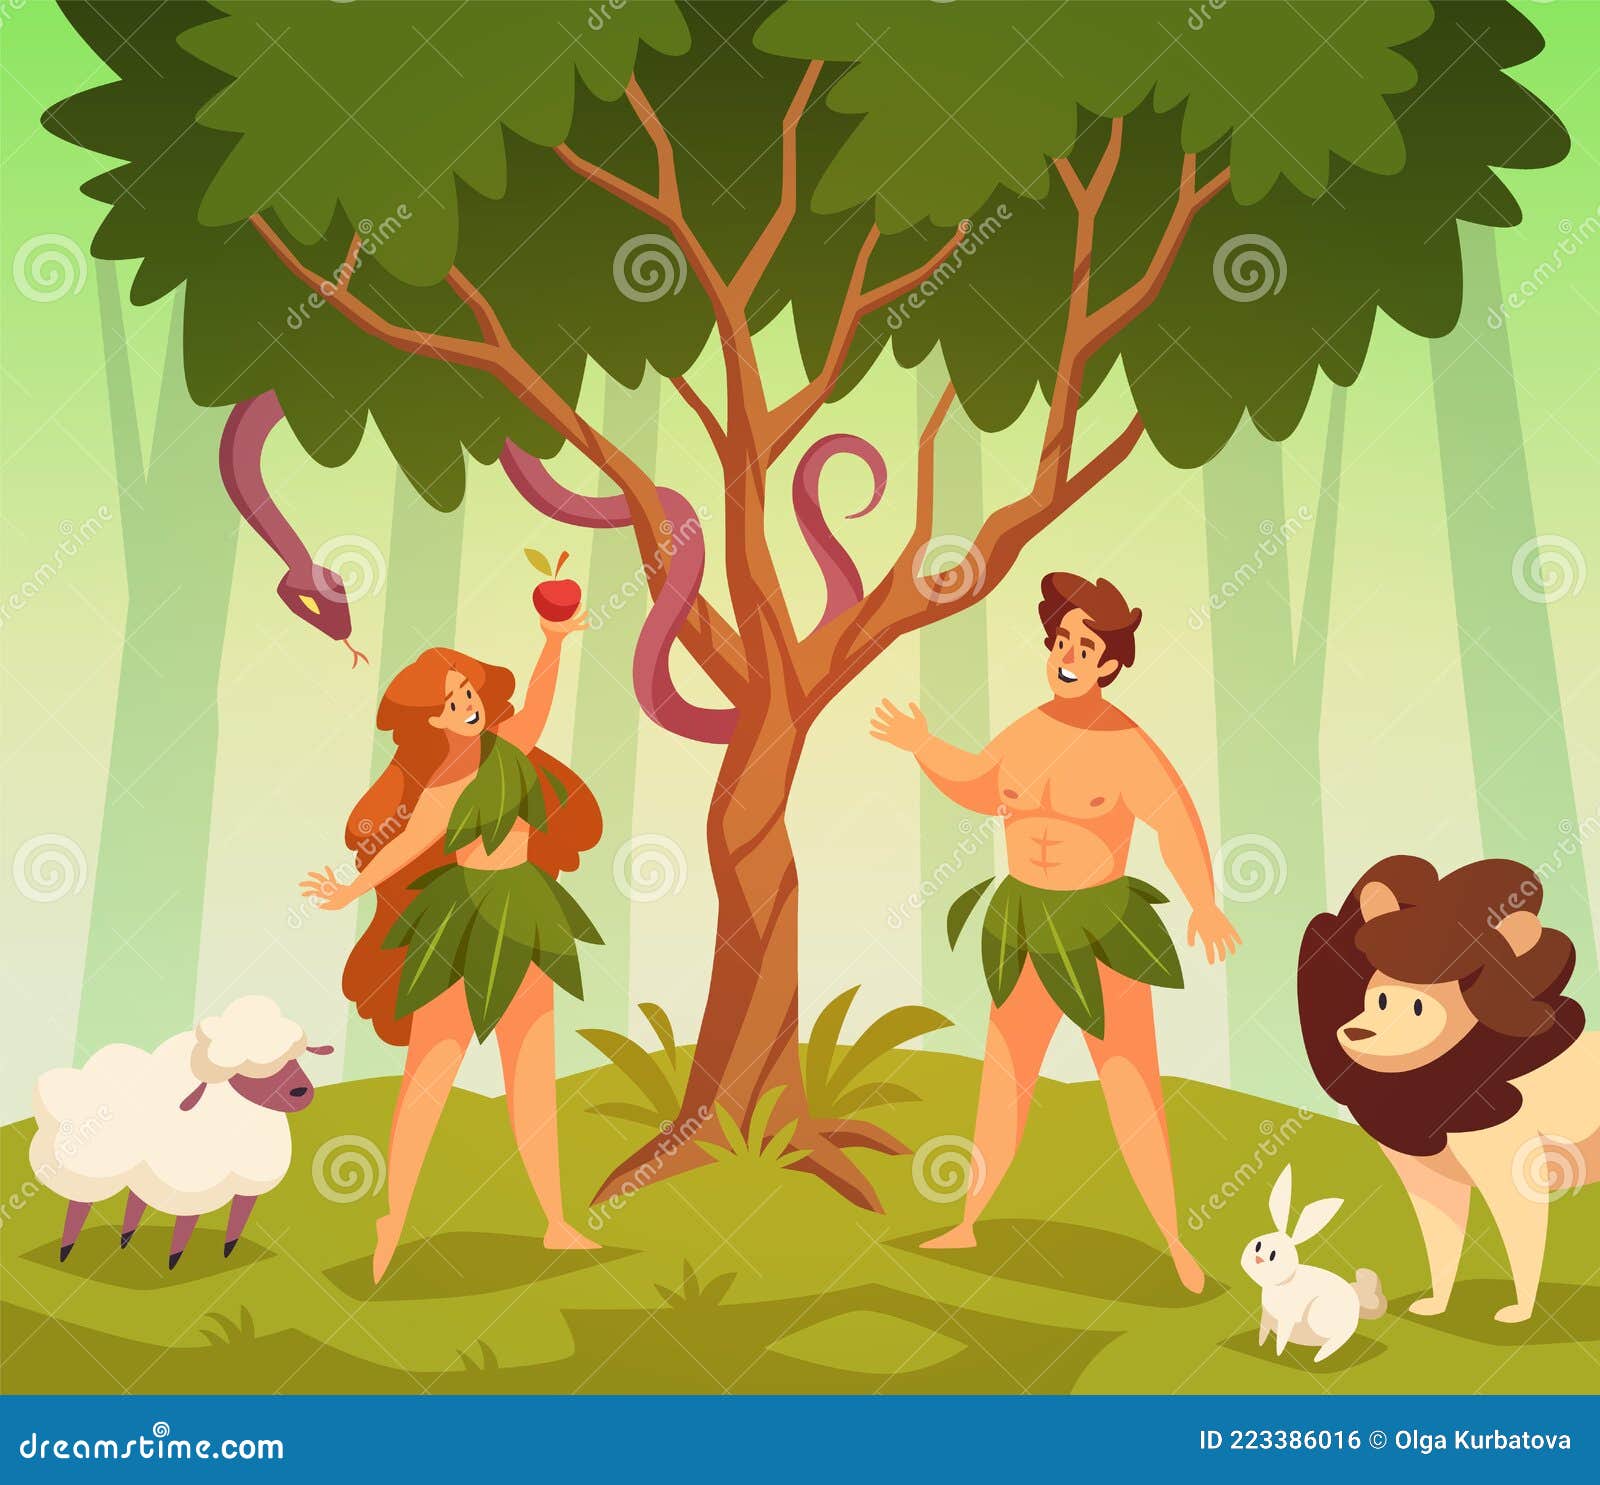 adam and eve. bible story scene first man and woman in garden eden, knowledge good and evil, snake of temptation and